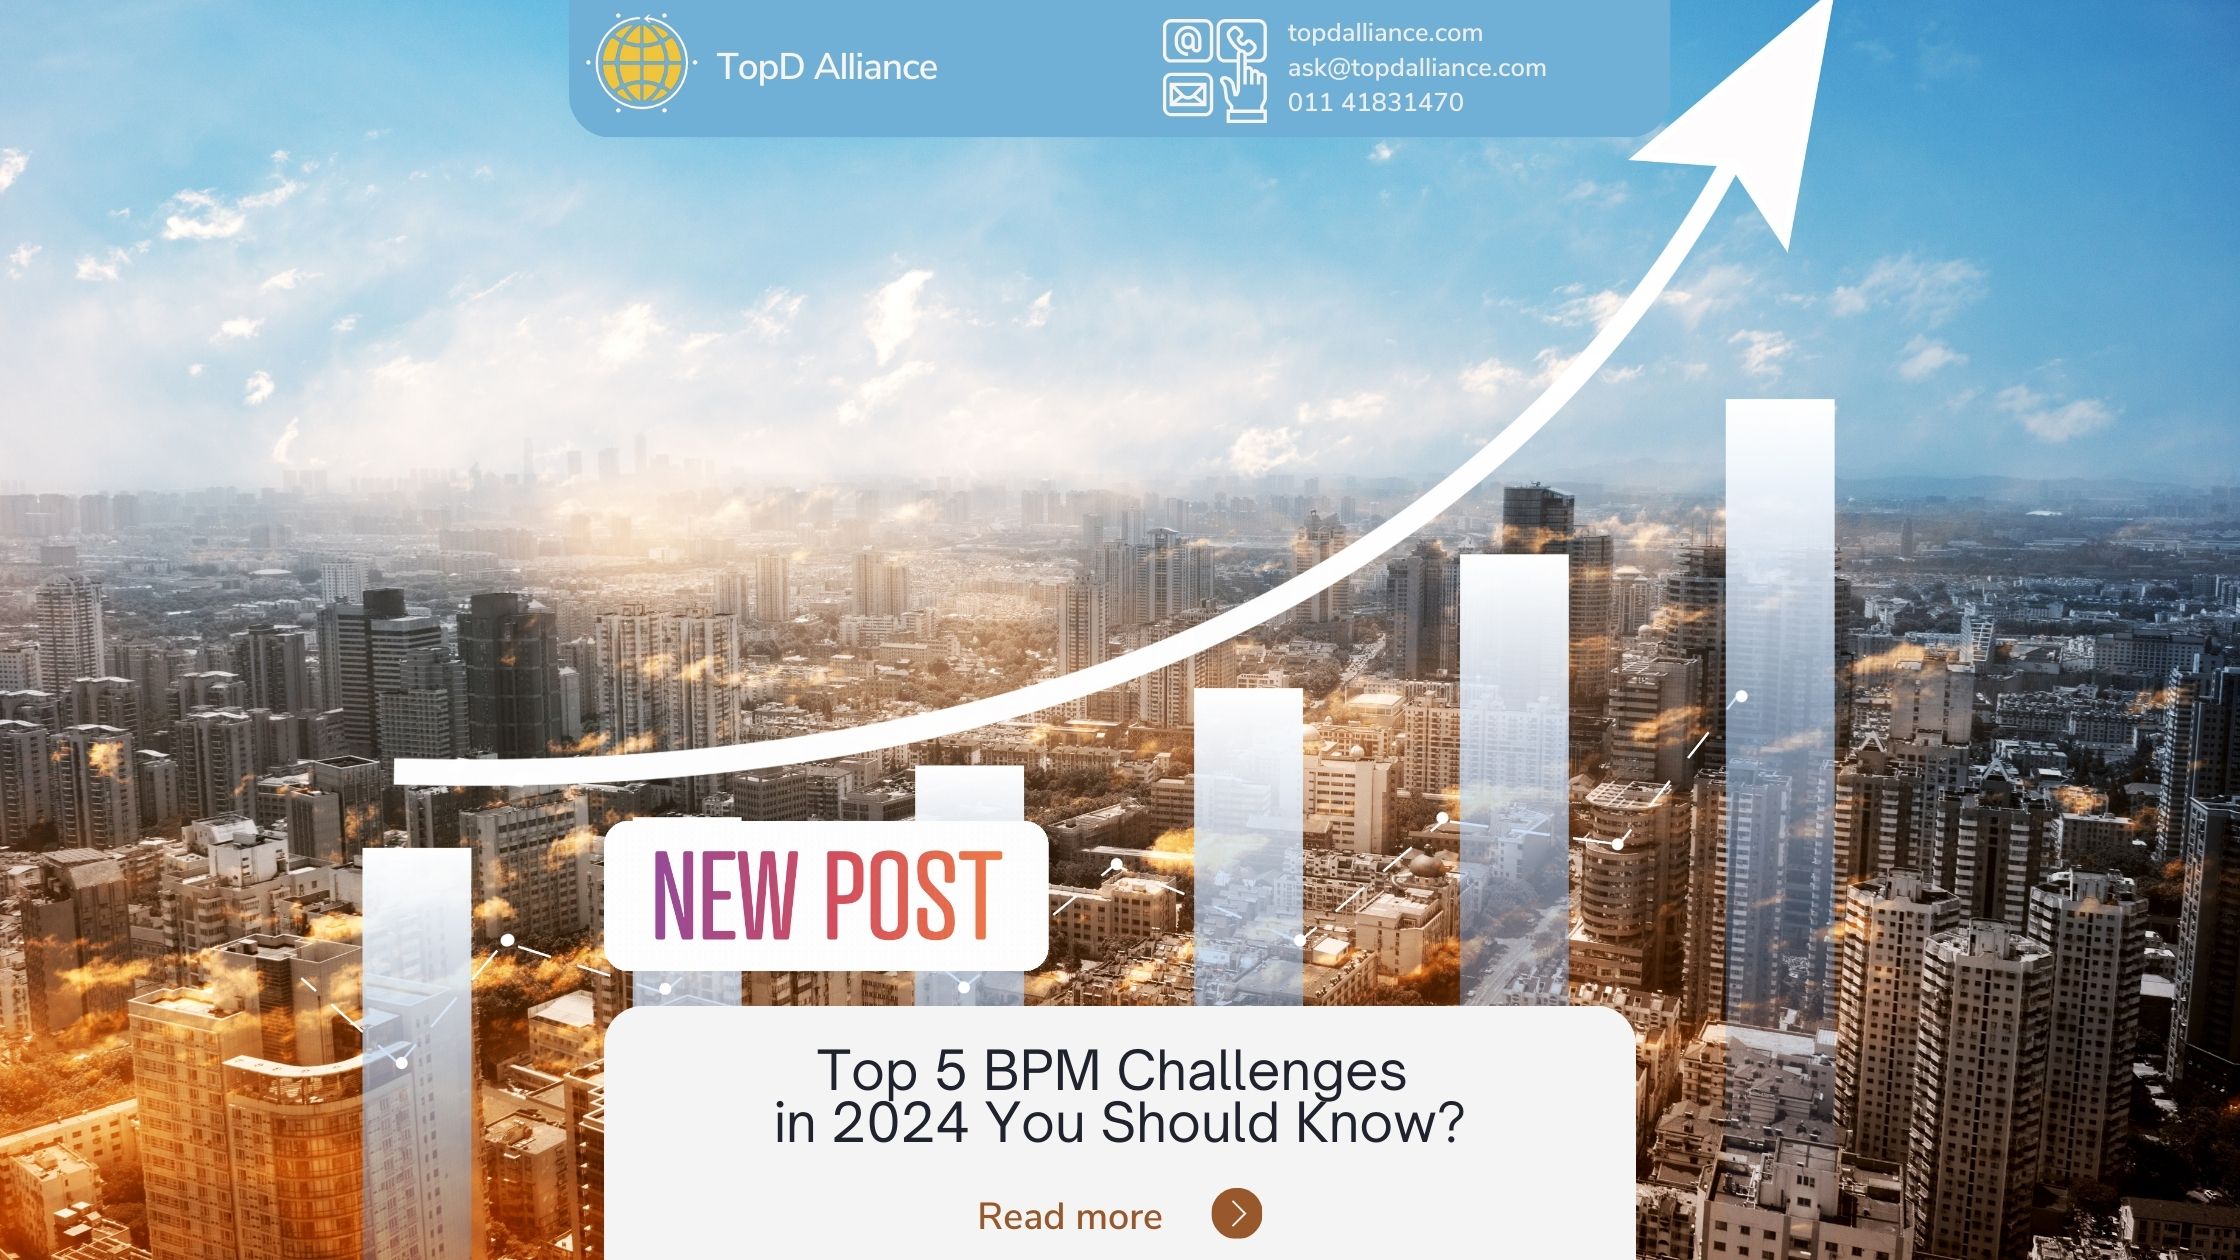 Top 5 BPM Challenges in 2024 You Should Know?